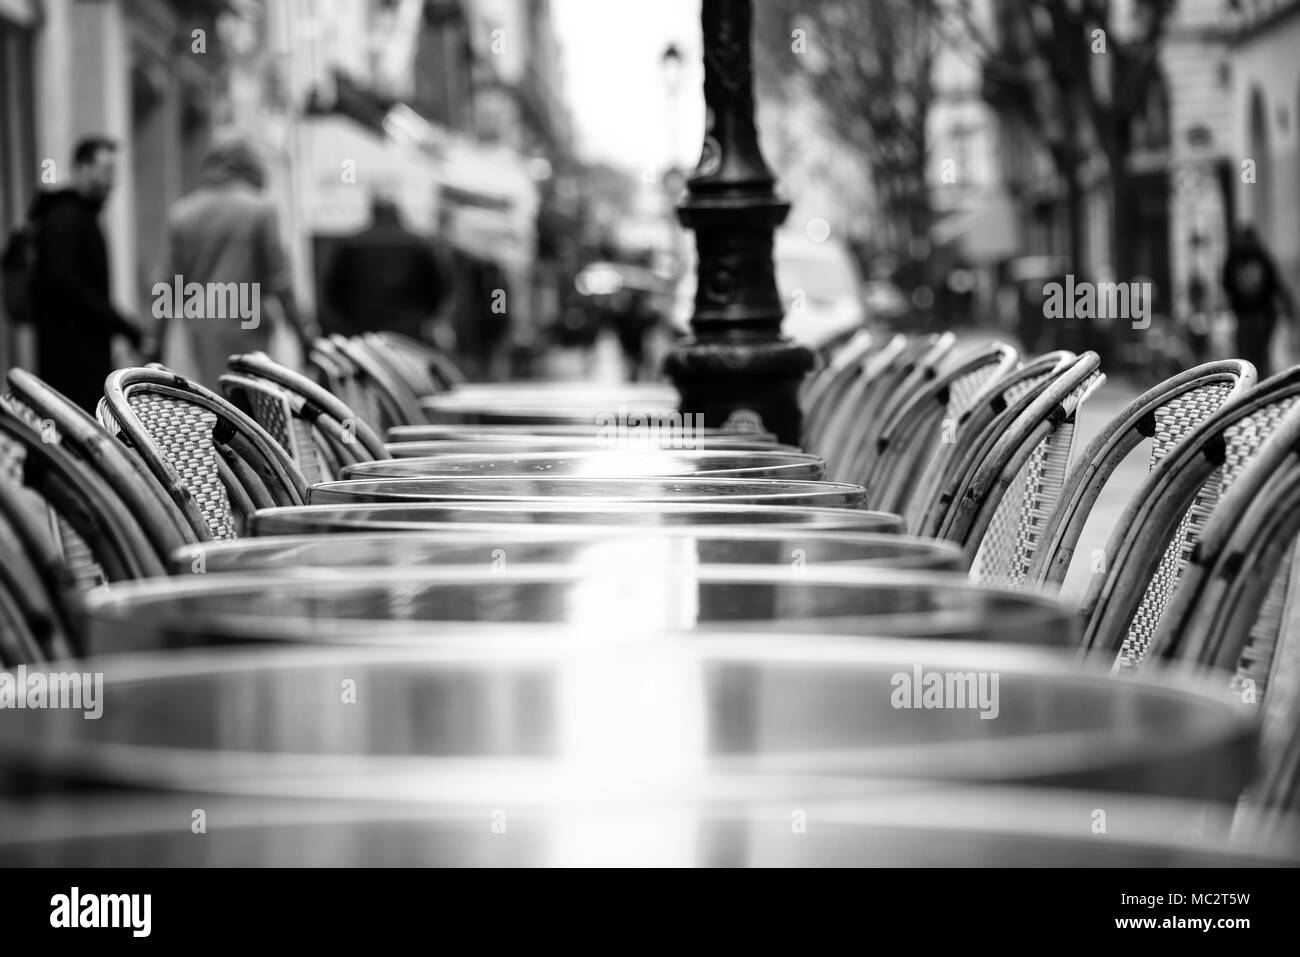 Street view of a Cafe terrace with empty tables and chairs. black and white photo. Stock Photo